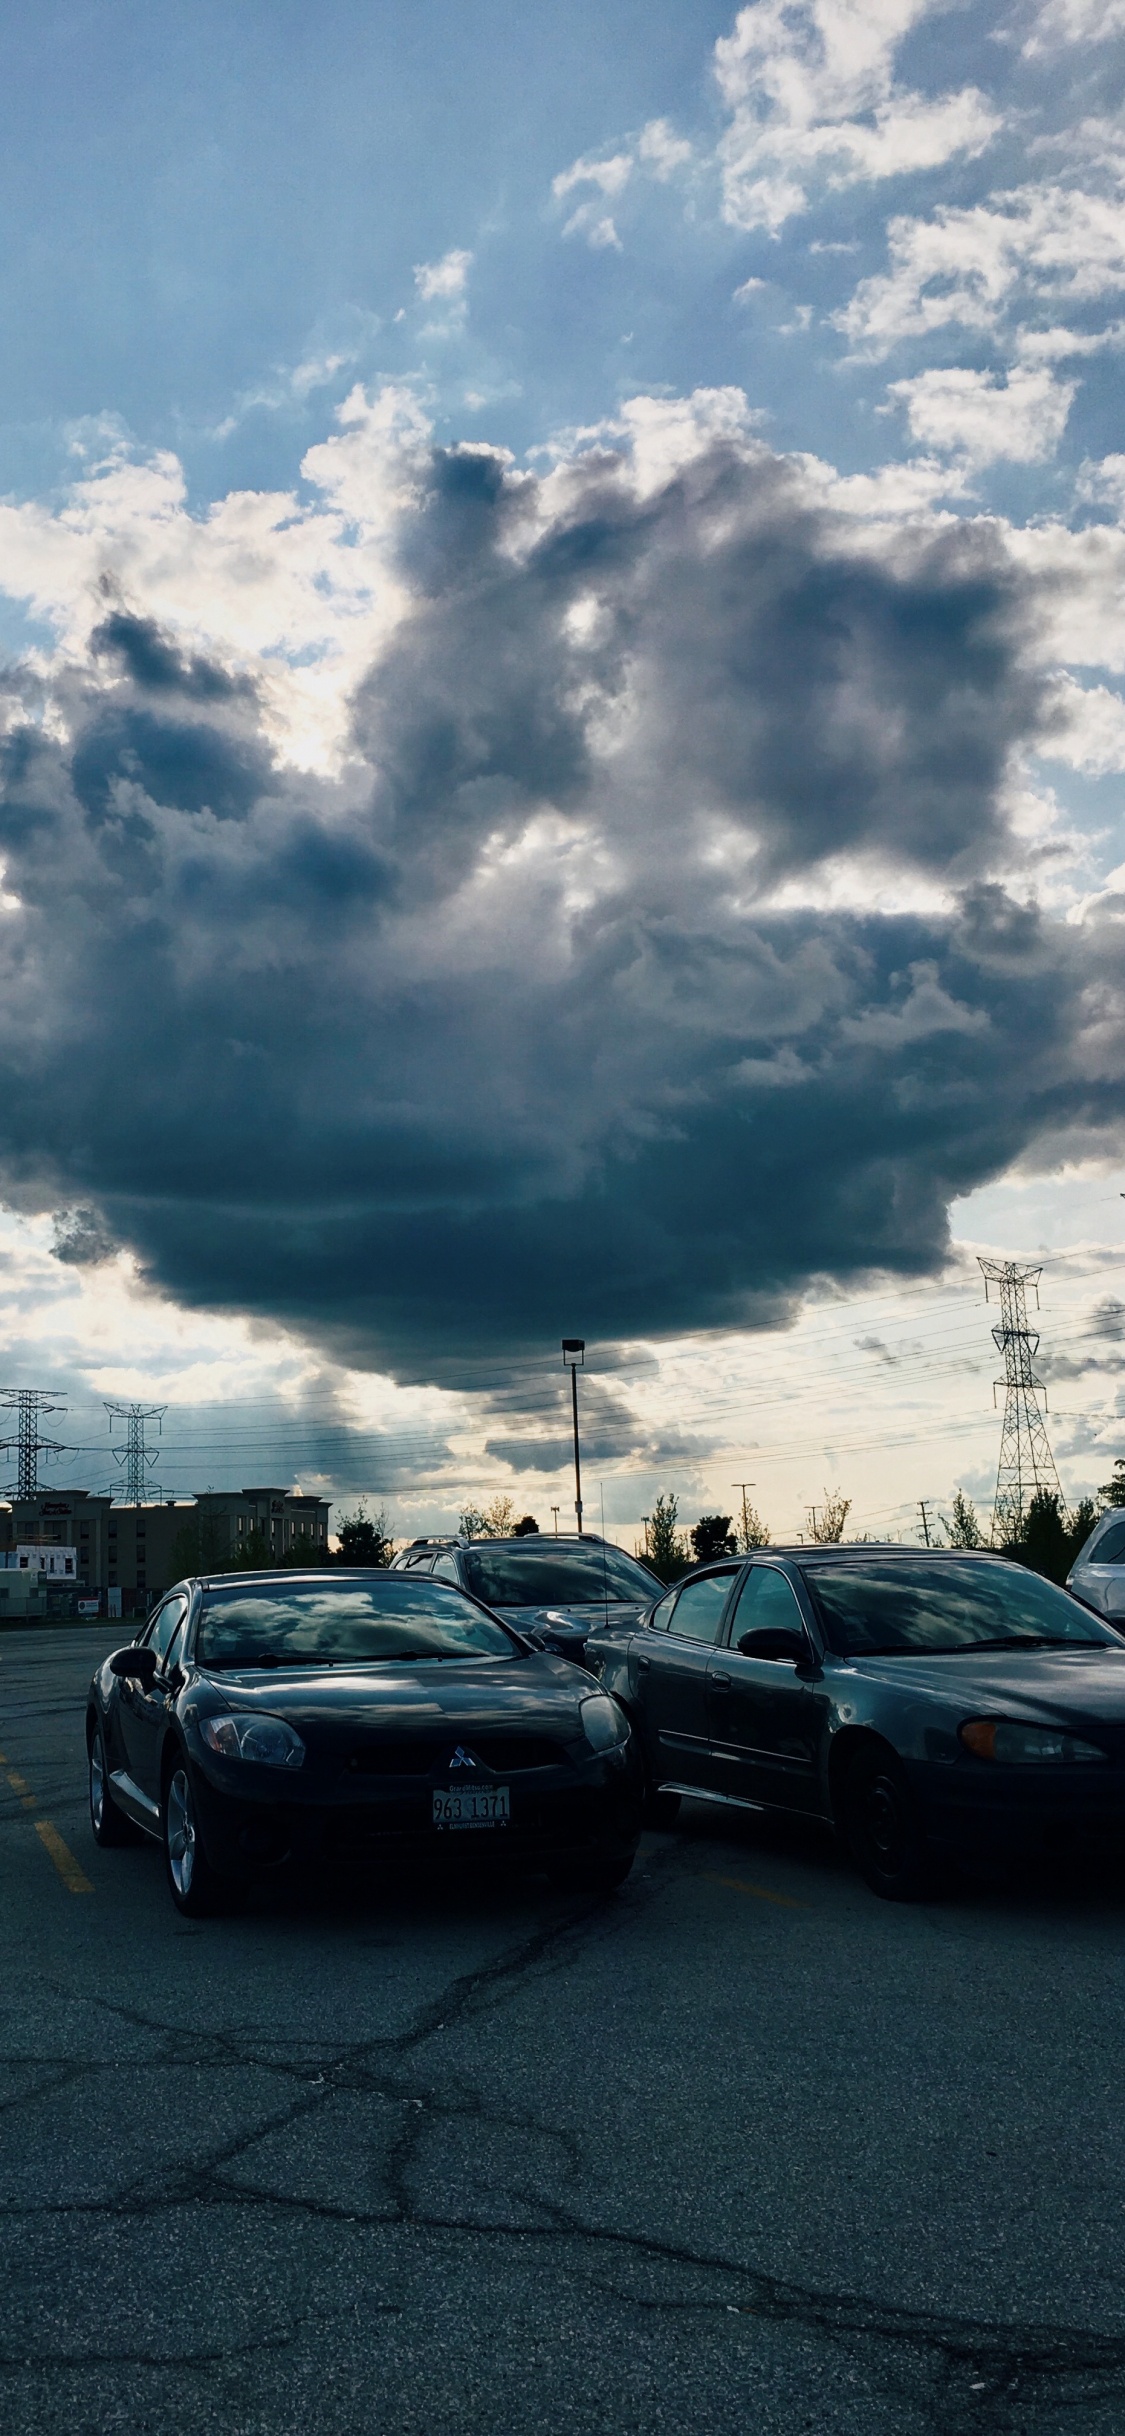 Cars on Road Under Cloudy Sky During Daytime. Wallpaper in 1125x2436 Resolution